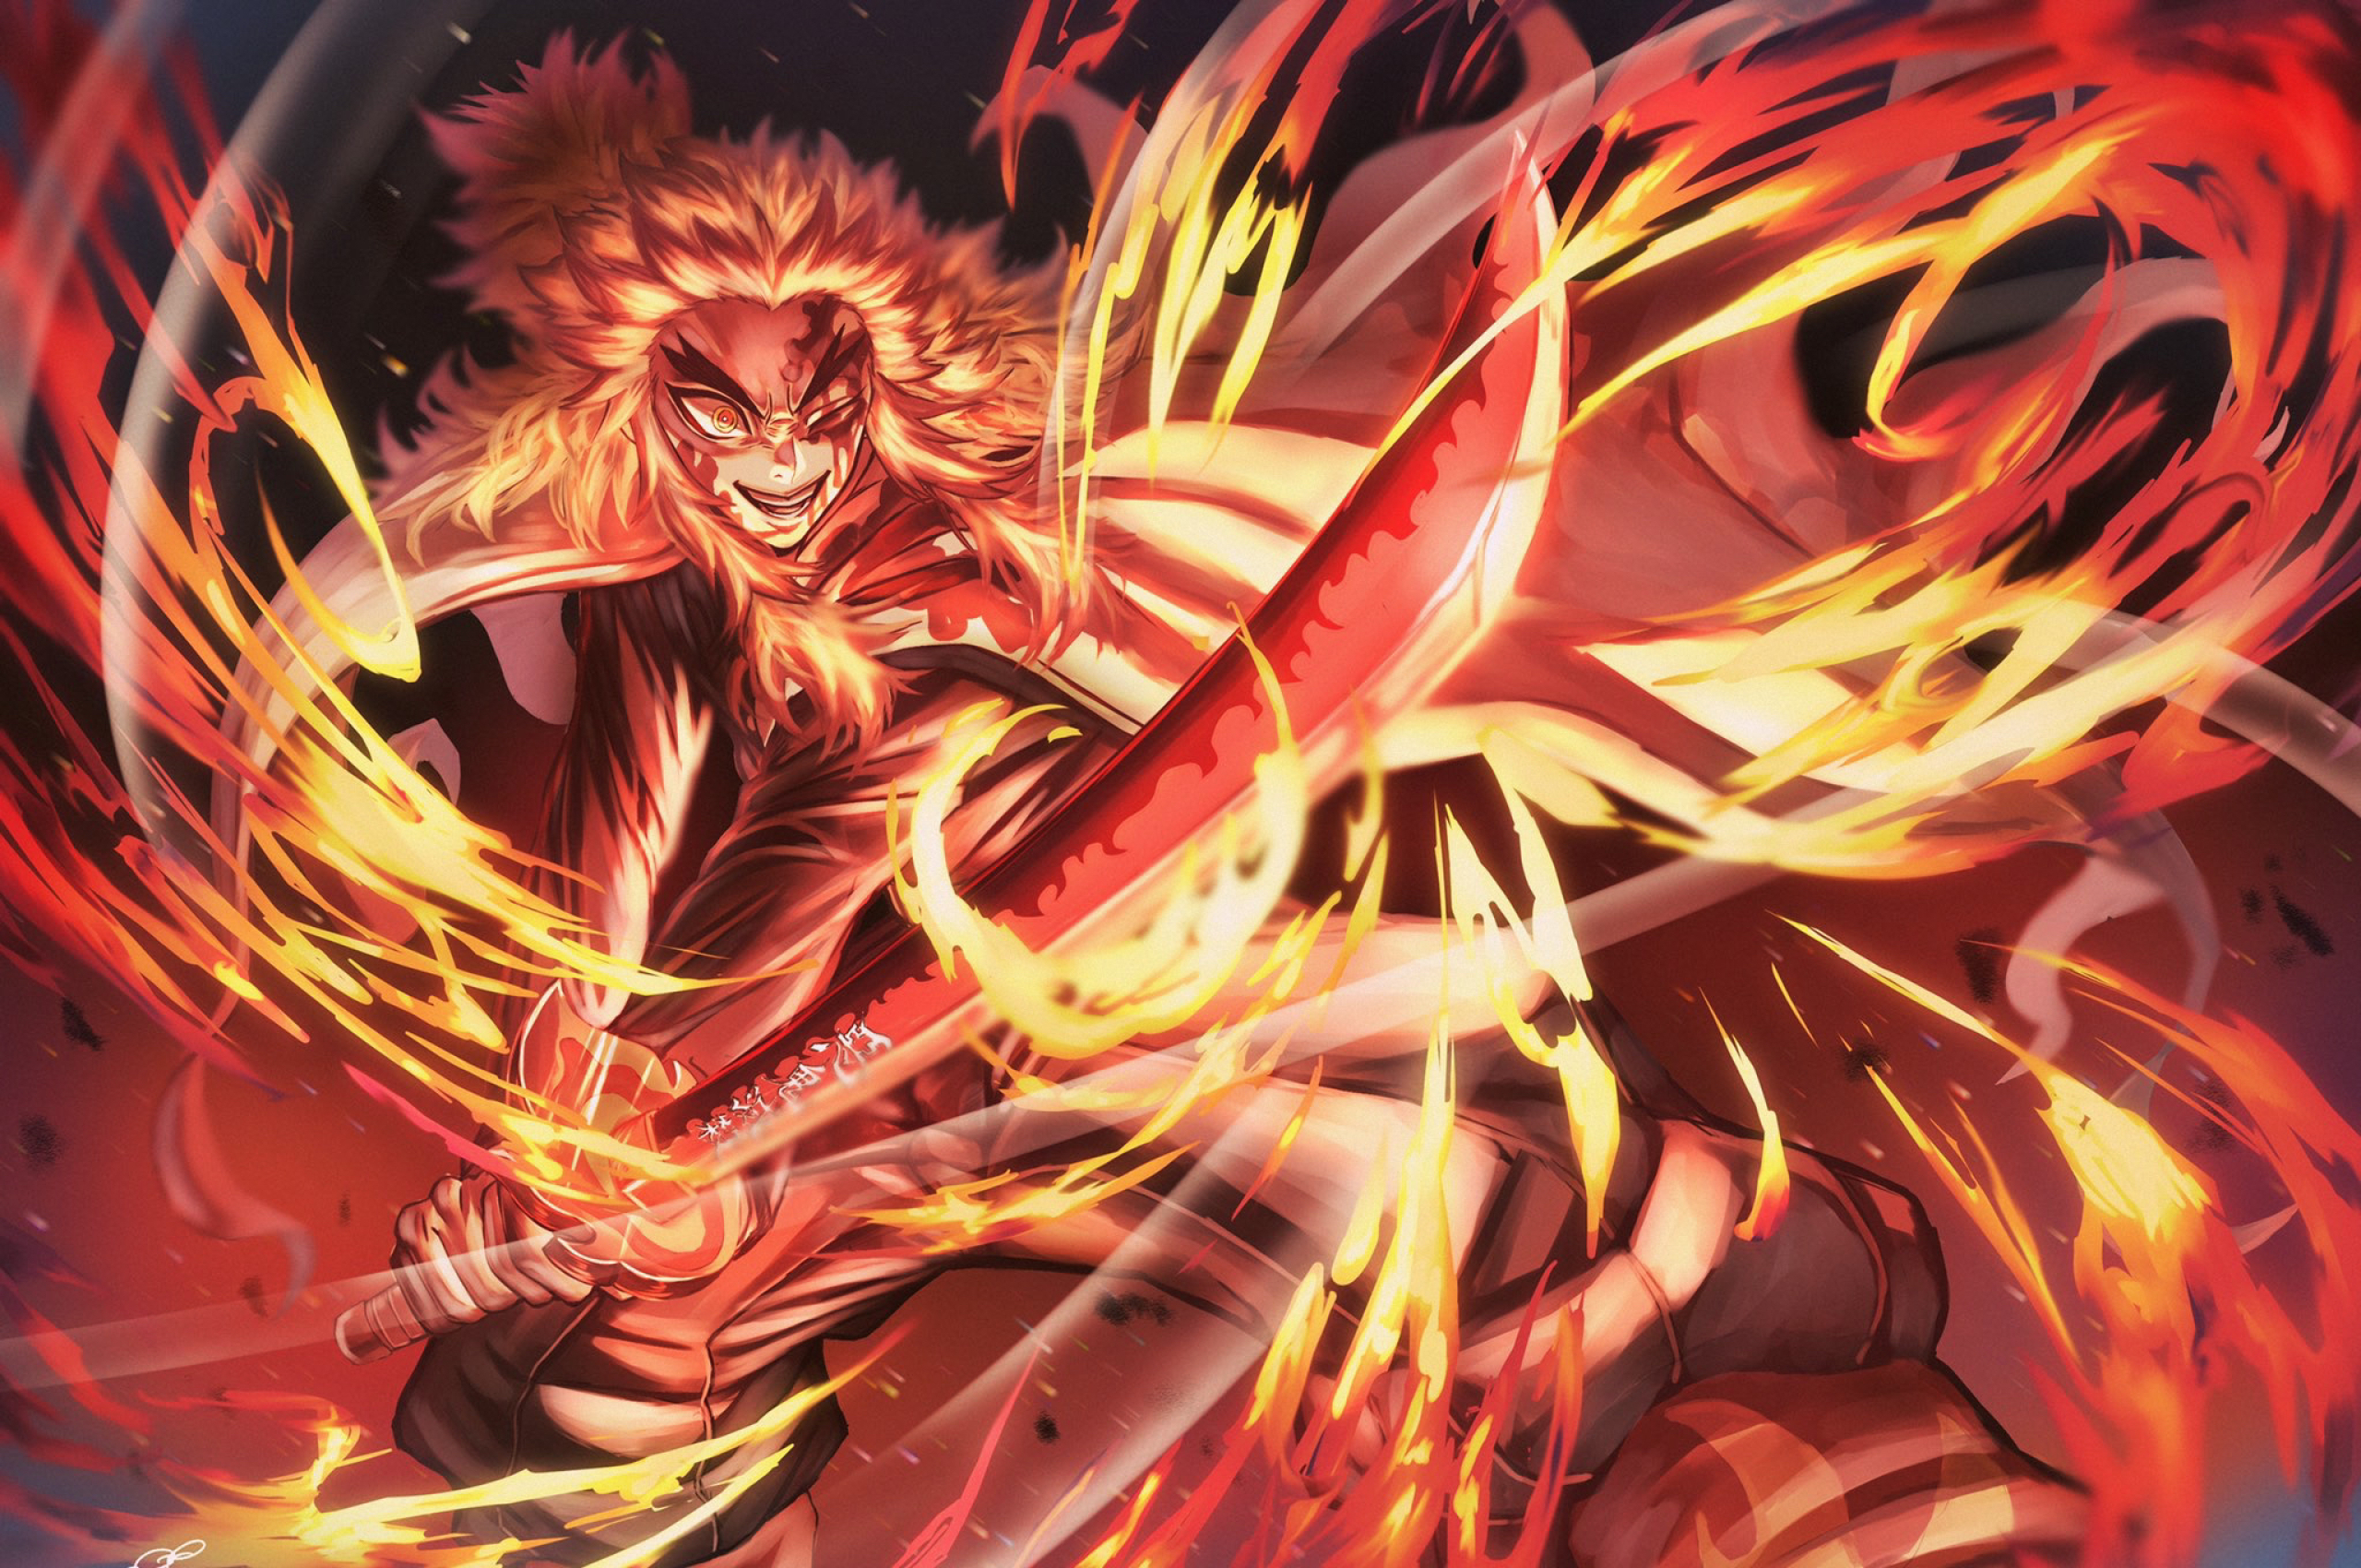 2560x1700 Kyojuro Rengoku Dopest Chromebook Pixel Wallpaper Hd Anime 4k Wallpapers Images Photos And Background Wallpapers Den